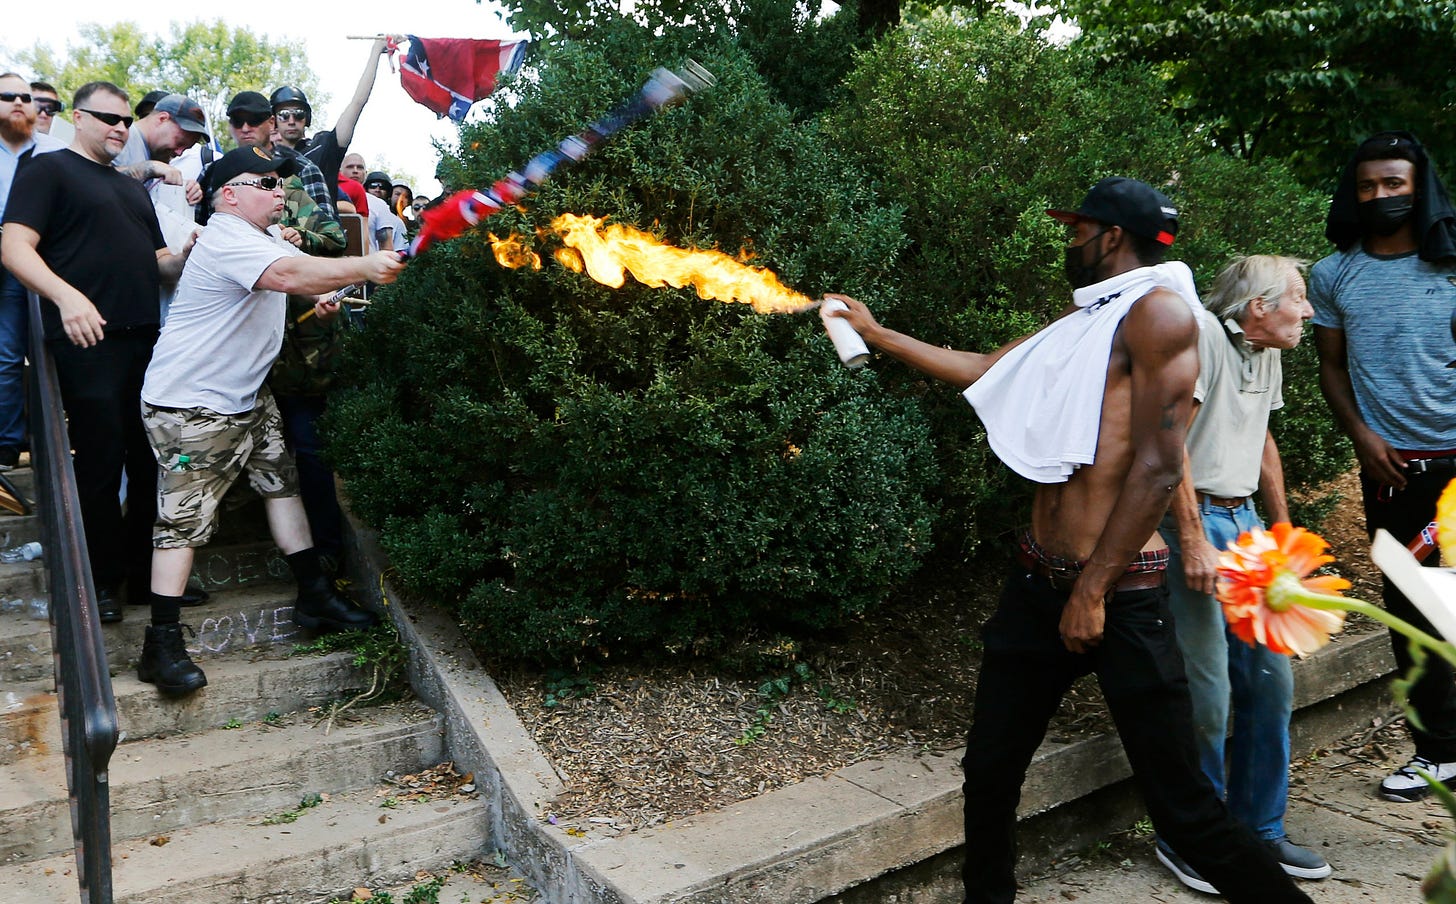 An Image of Revolutionary Fire at Charlottesville | The New Yorker